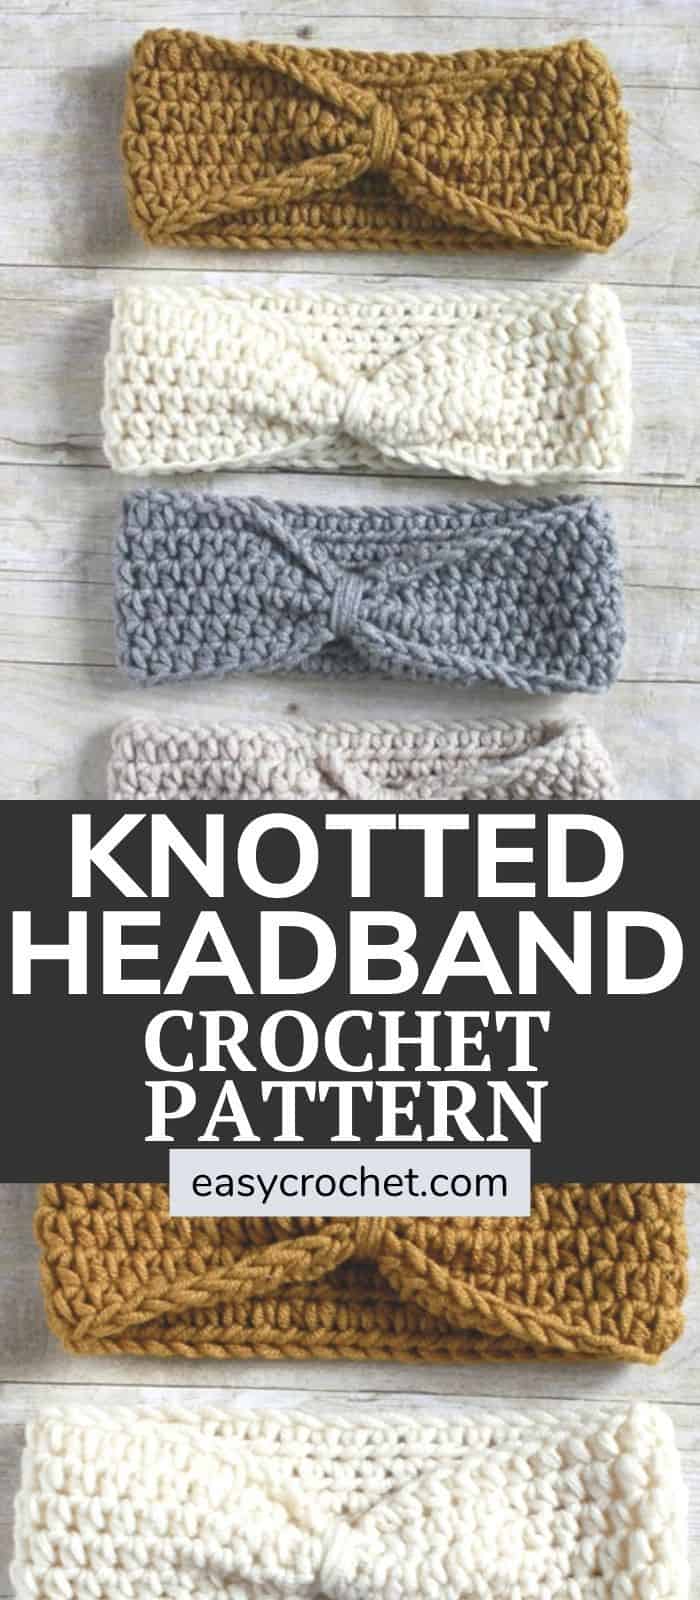 Learn how to make this crochet headband with a knot with our FREE crochet pattern! via @easycrochetcom